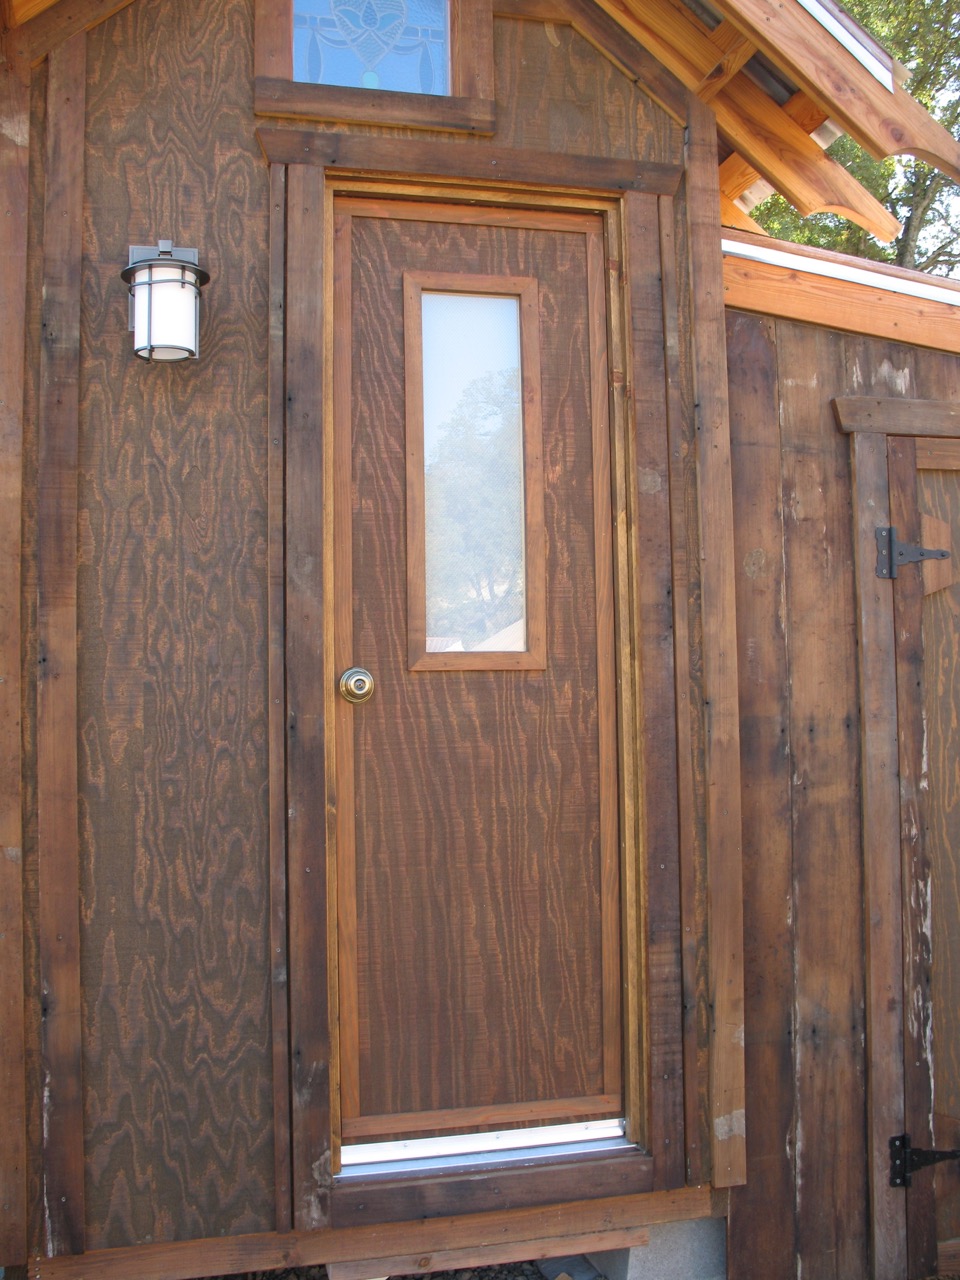 Outhouse door exterior